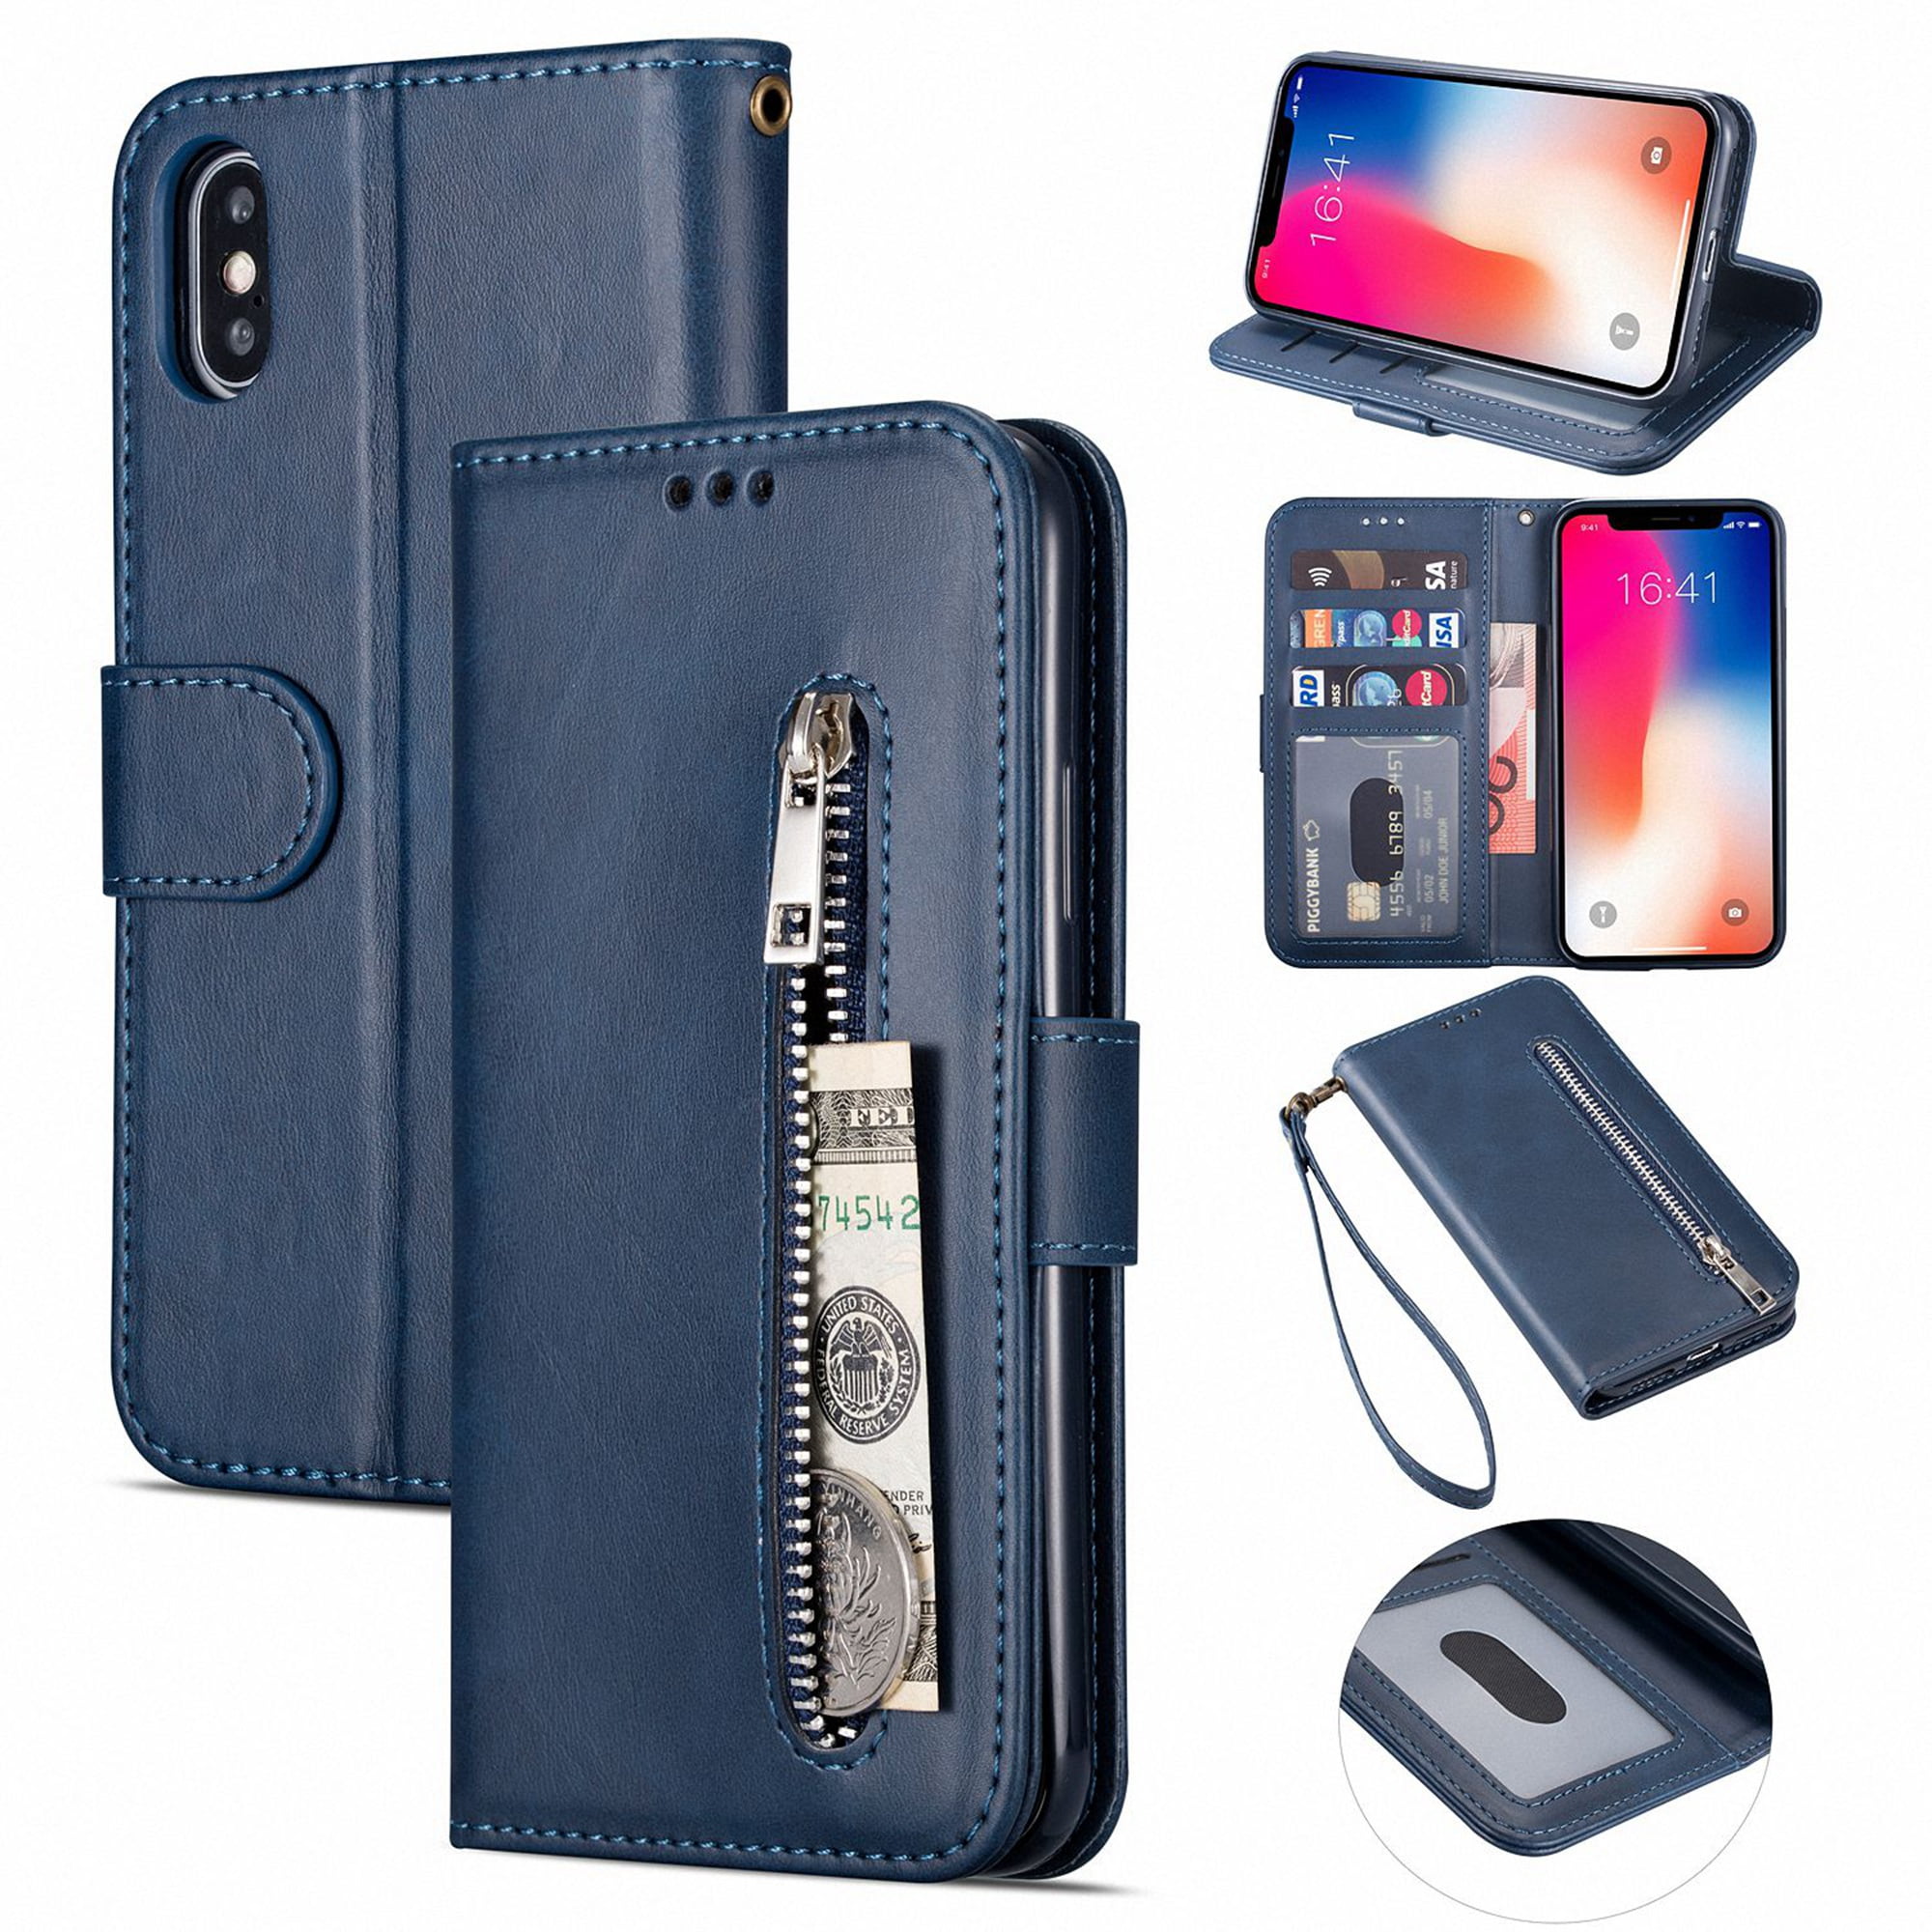  Ready to Ship Zipper Blue Napa Leather Travel Wallet for Apple  iPhone X, XS, XS Max, 8 Plus / 7 Plus / 6(s) Plus & Passport